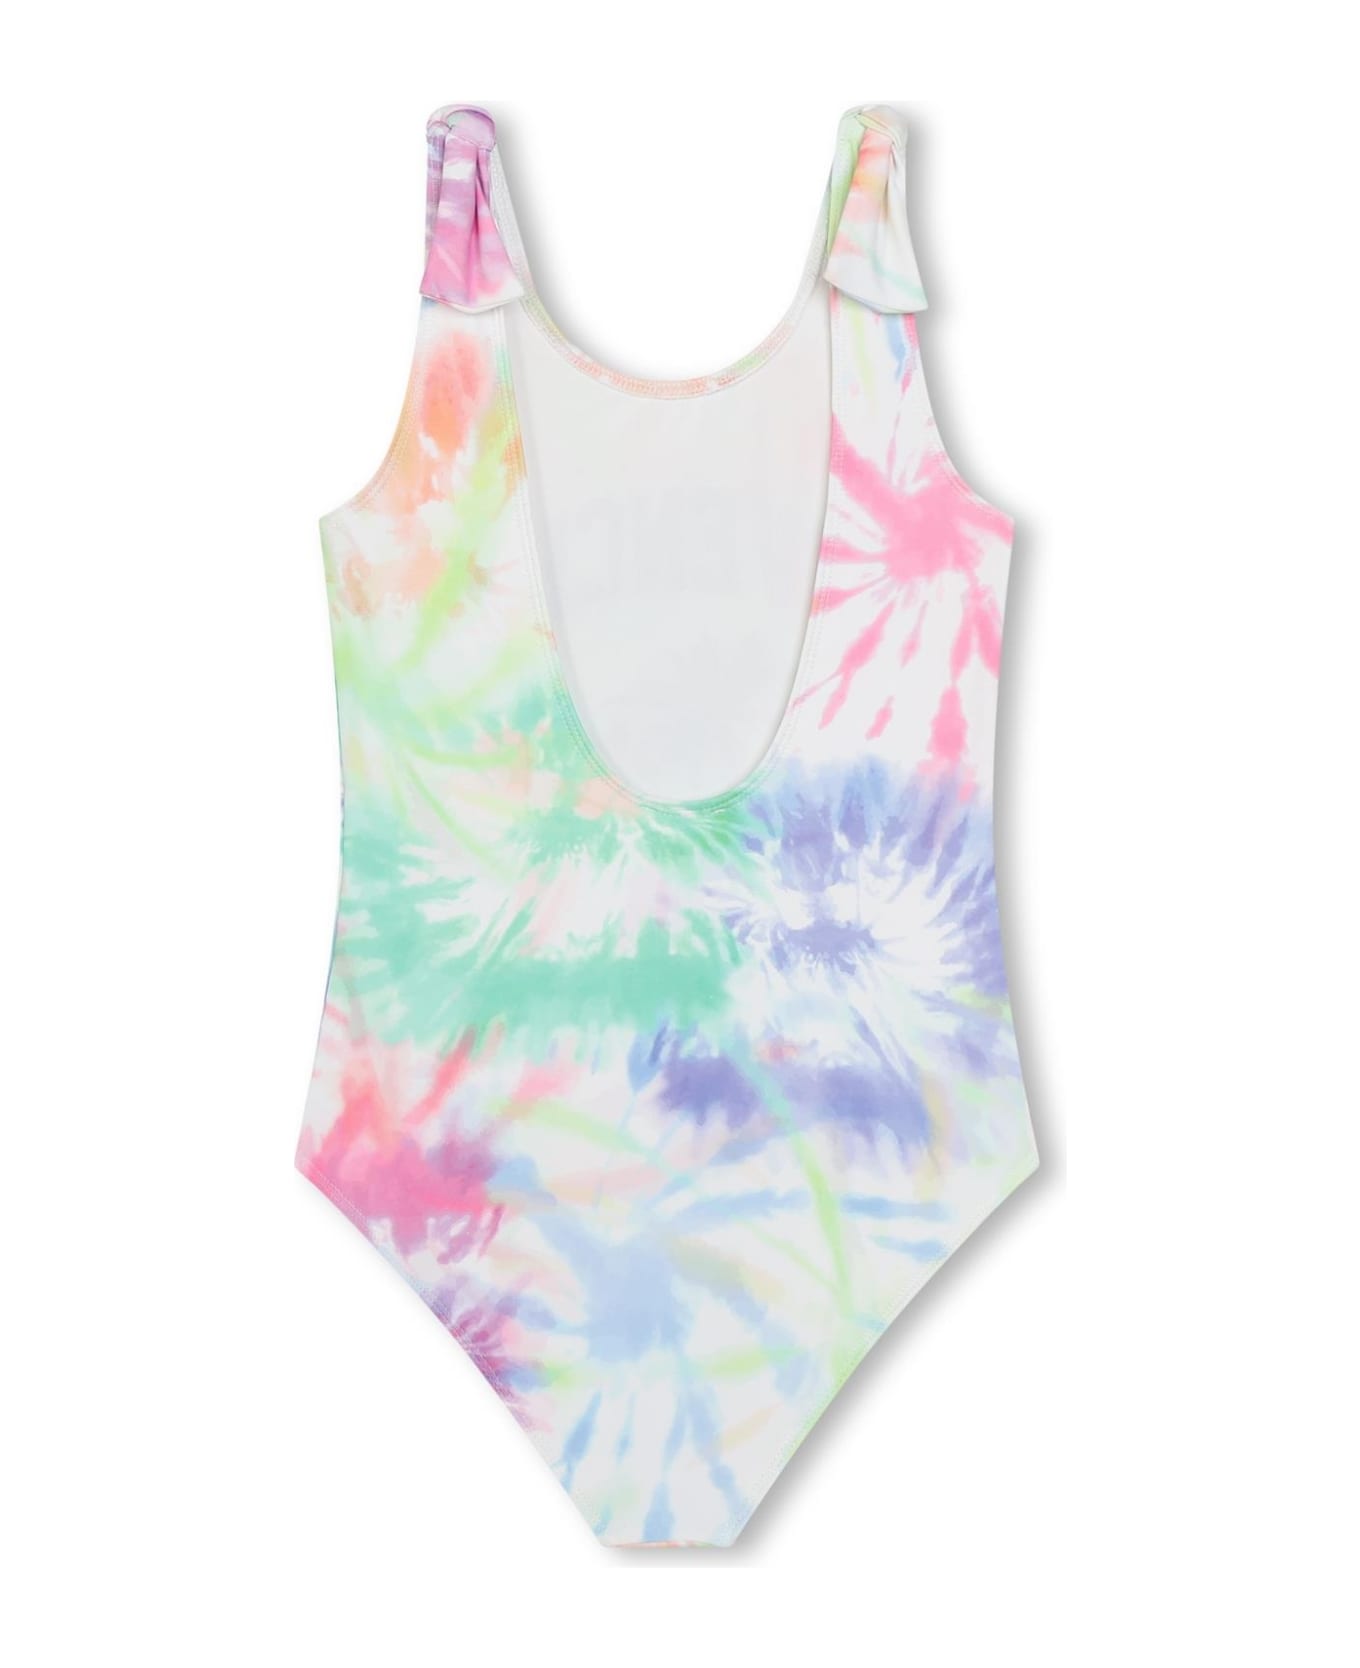 Givenchy One-piece Swimsuit With Tie Dye Pattern - Multicolor 水着